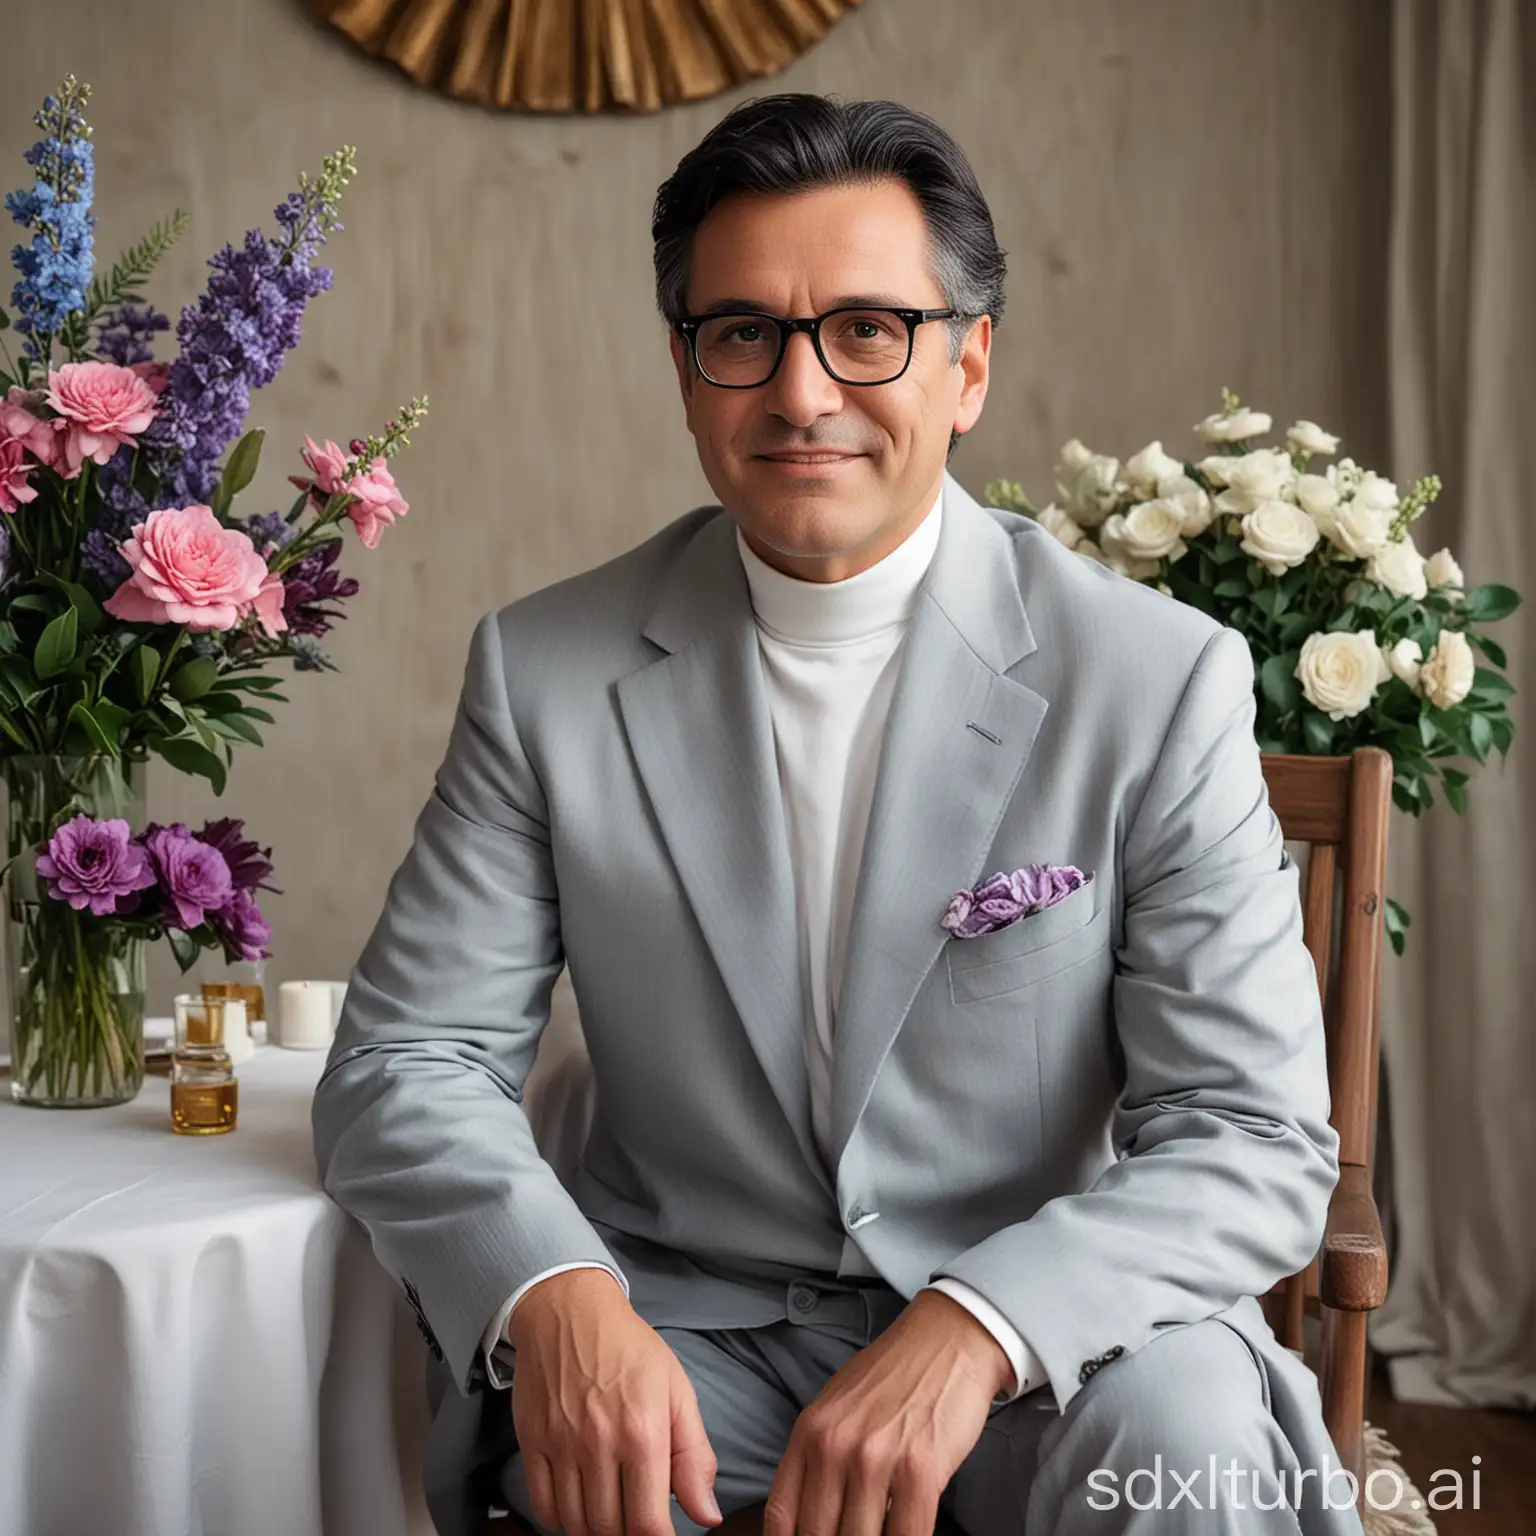 Create an image of a middle-aged man sitting on a chair. The man is wearing a grey suit and a white turtleneck shirt. He has black-framed glasses and neatly combed black hair. The man has a calm expression and a slight smile. In the background, there is a table with a white tablecloth and a floral arrangement featuring light blue and purple flowers. The room has wooden walls and several chairs with white covers and gold sashes.